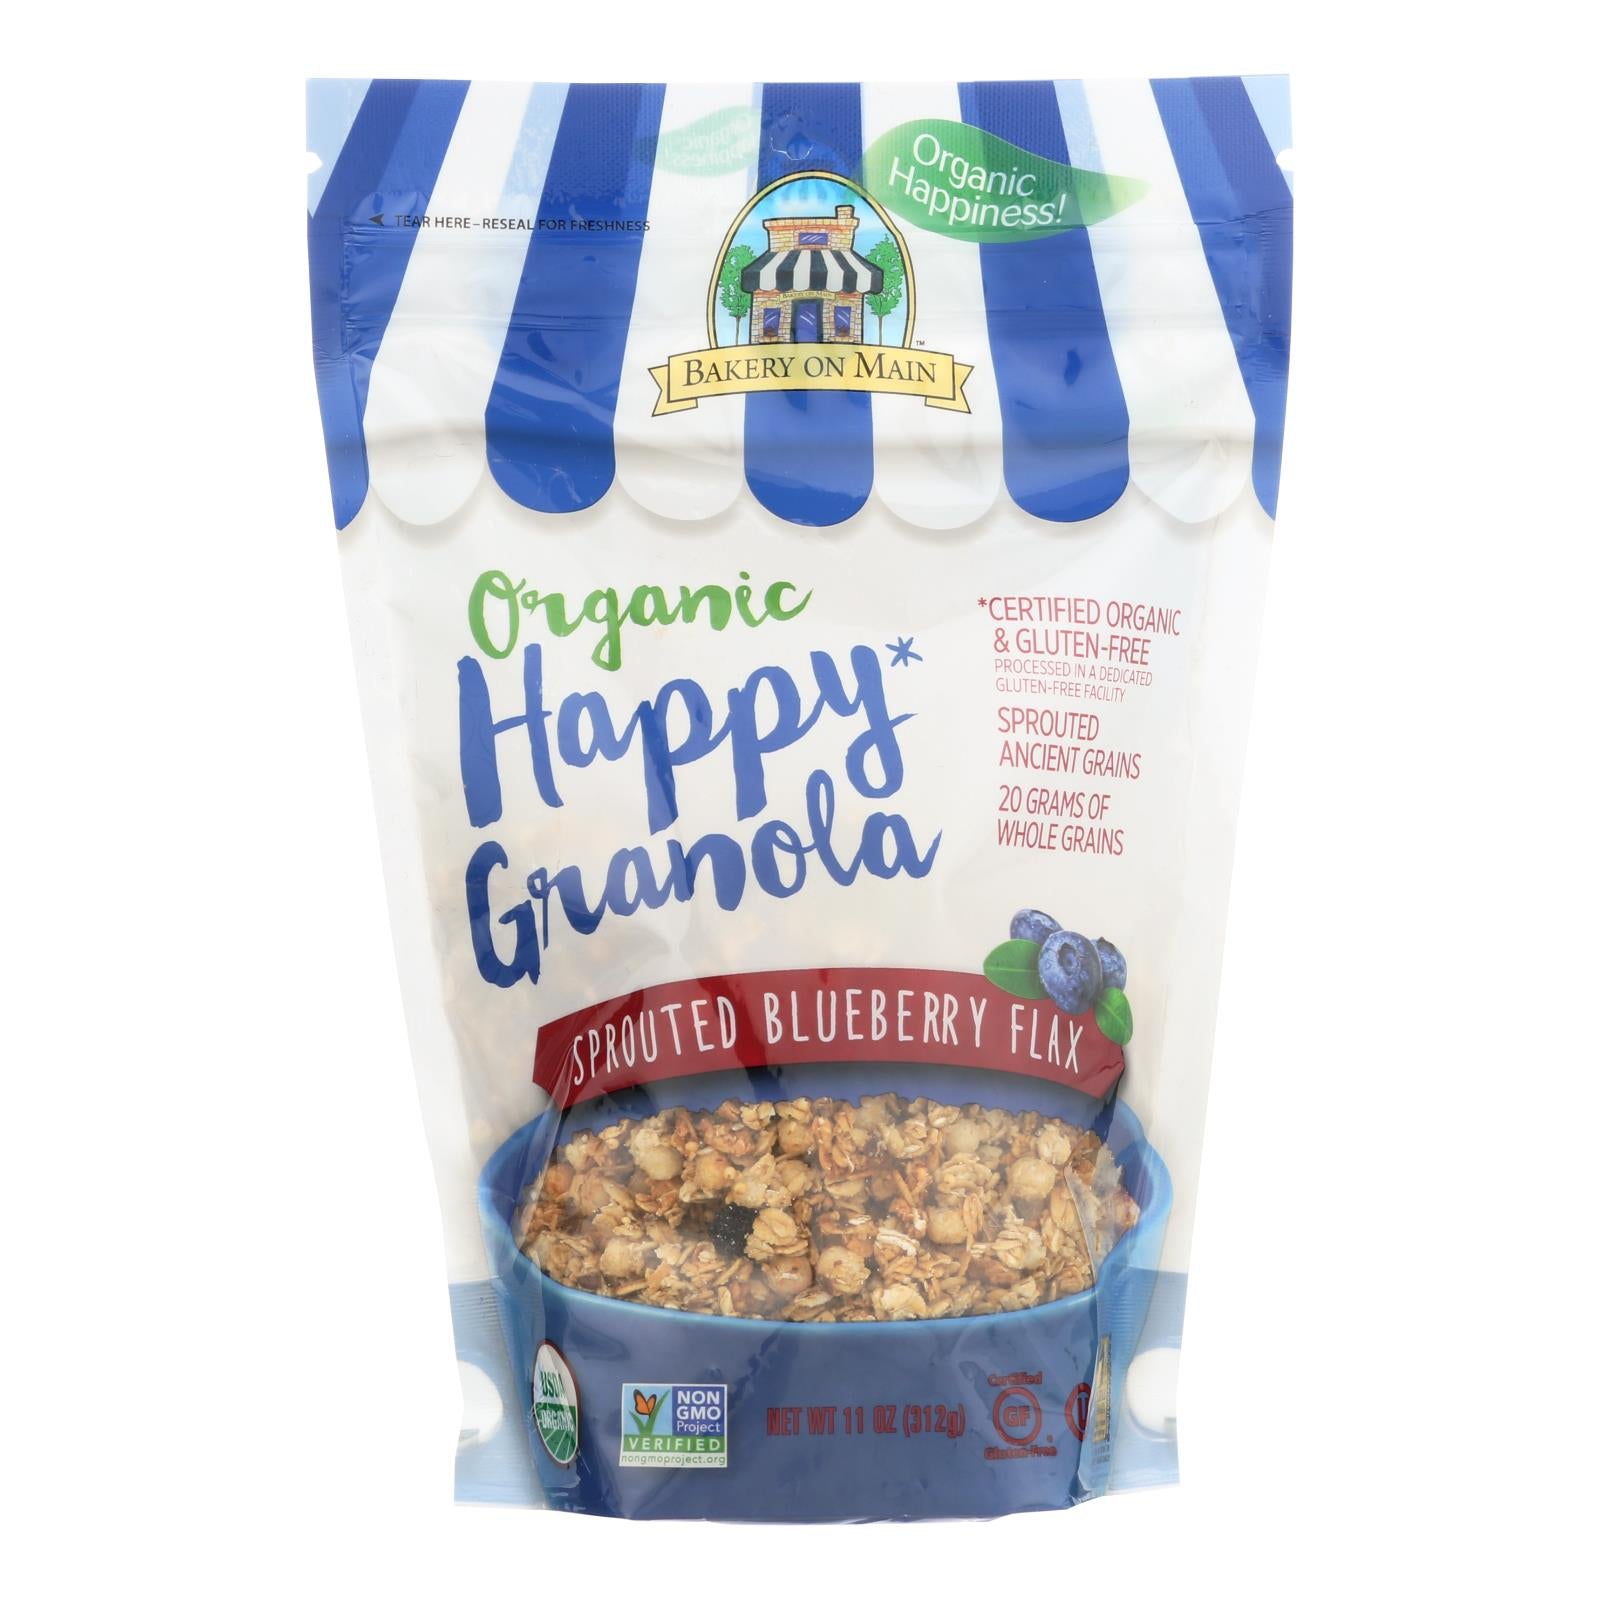 Bakery On Main, Bakery On Main Organic Happy Granola - Sprouted Blueberry Flax - Case of 6 - 11 oz (Pack of 6)